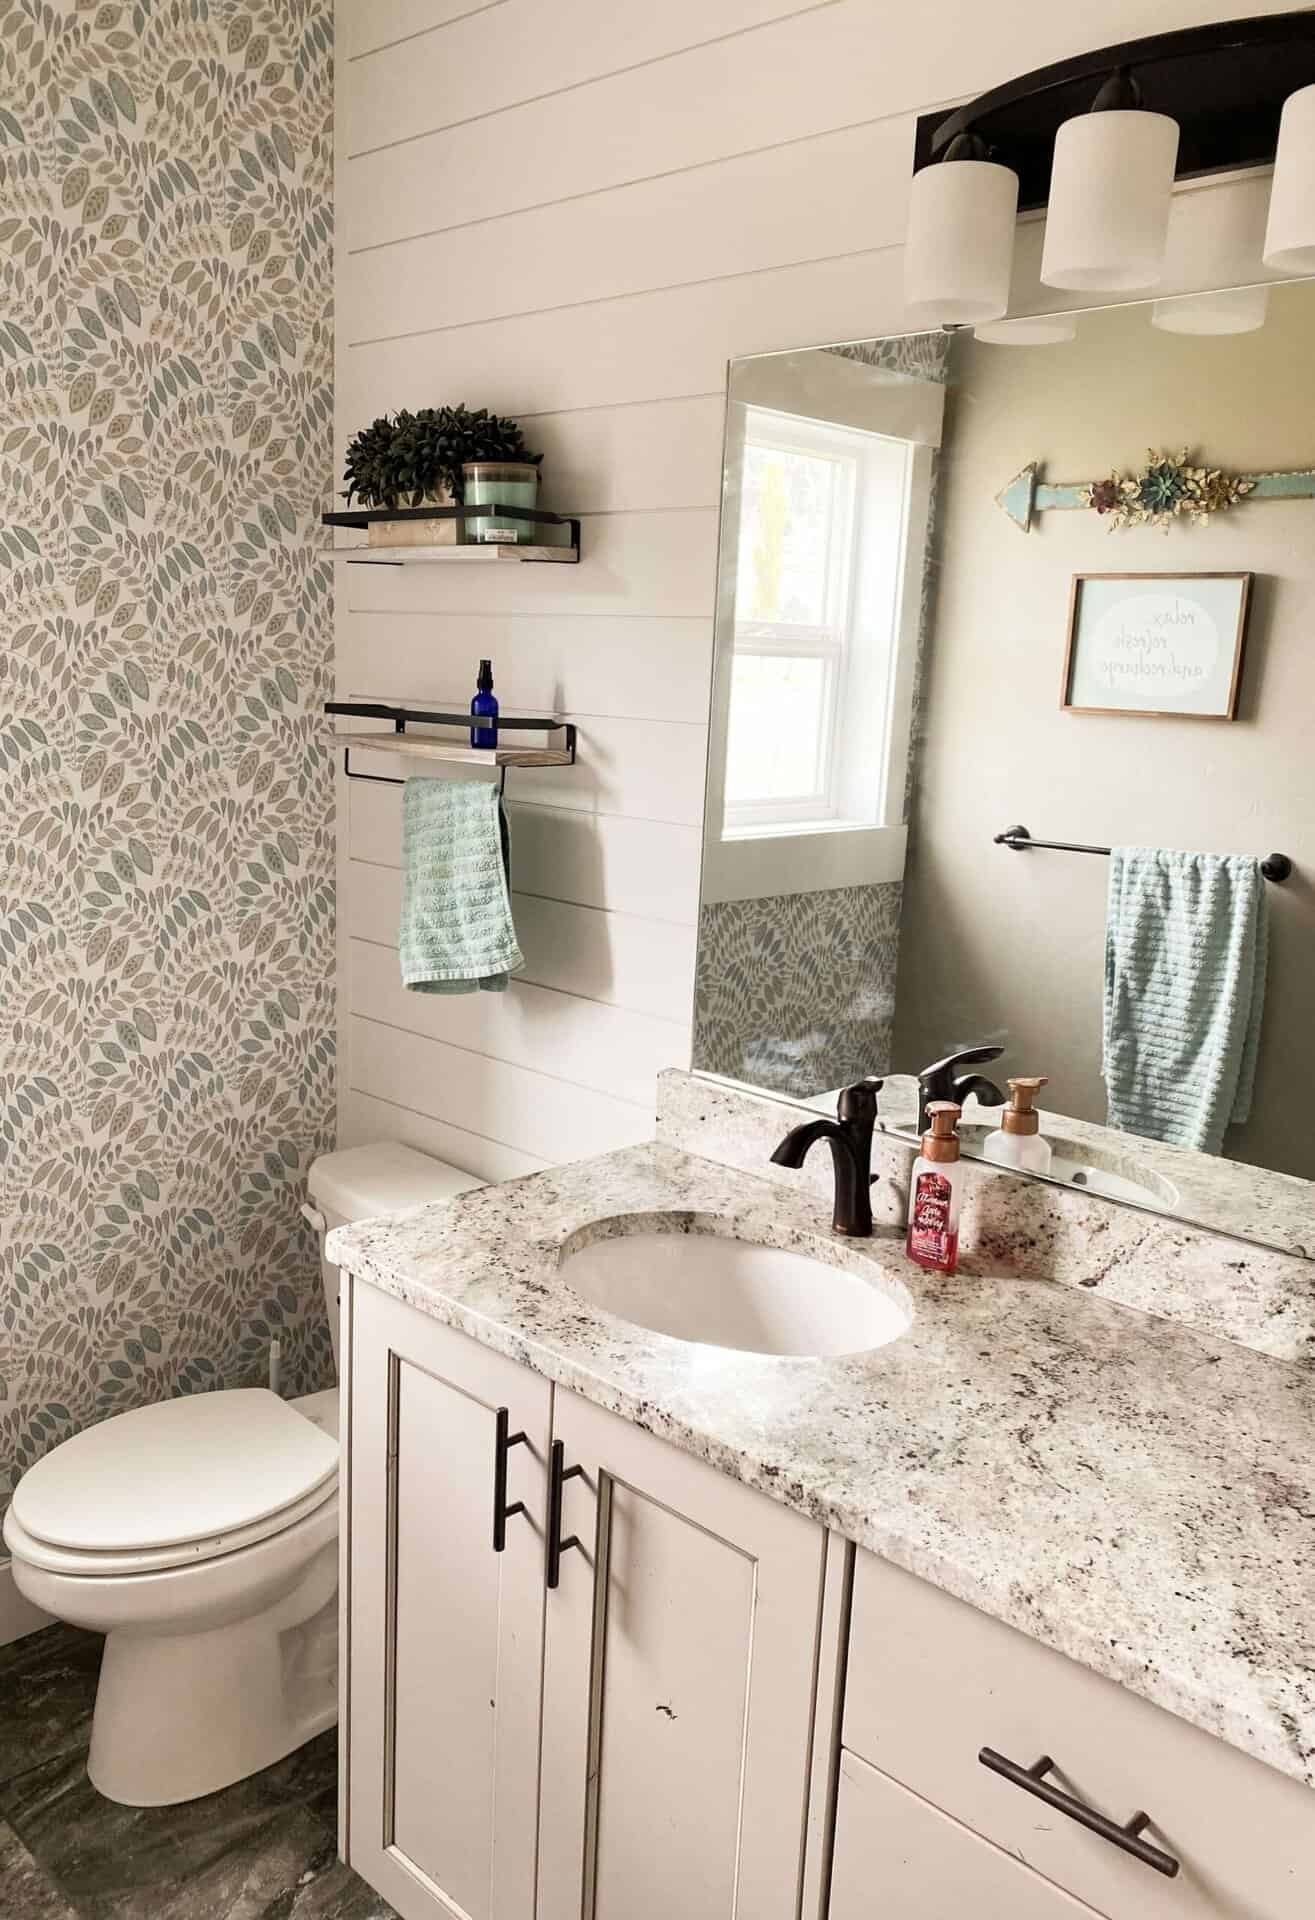 cabinets in bathroom